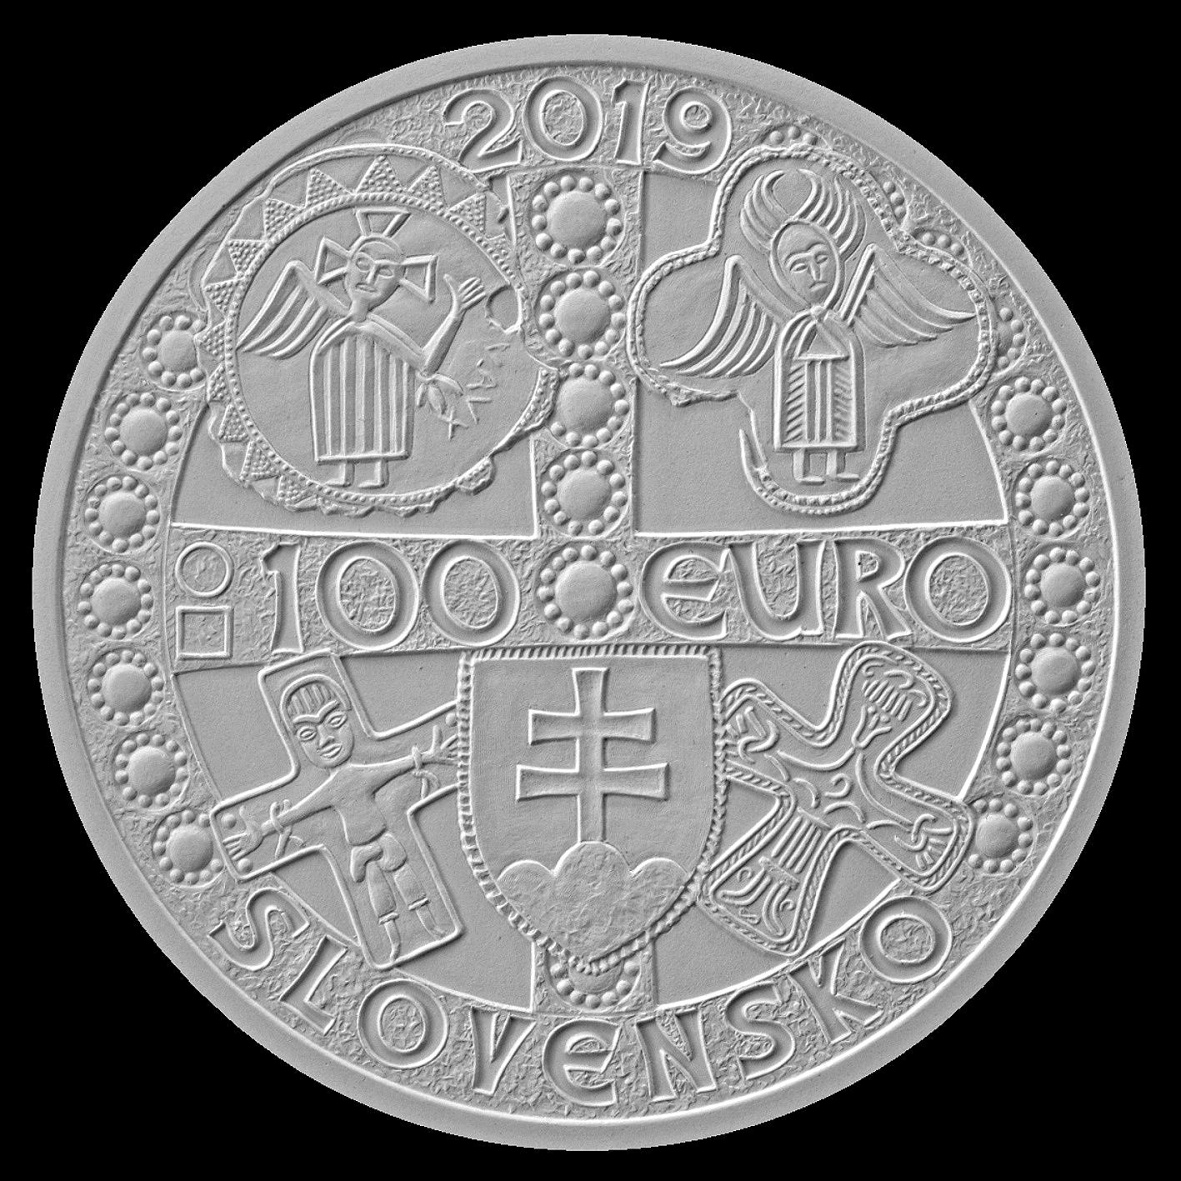 First prize and the design selected for the coin